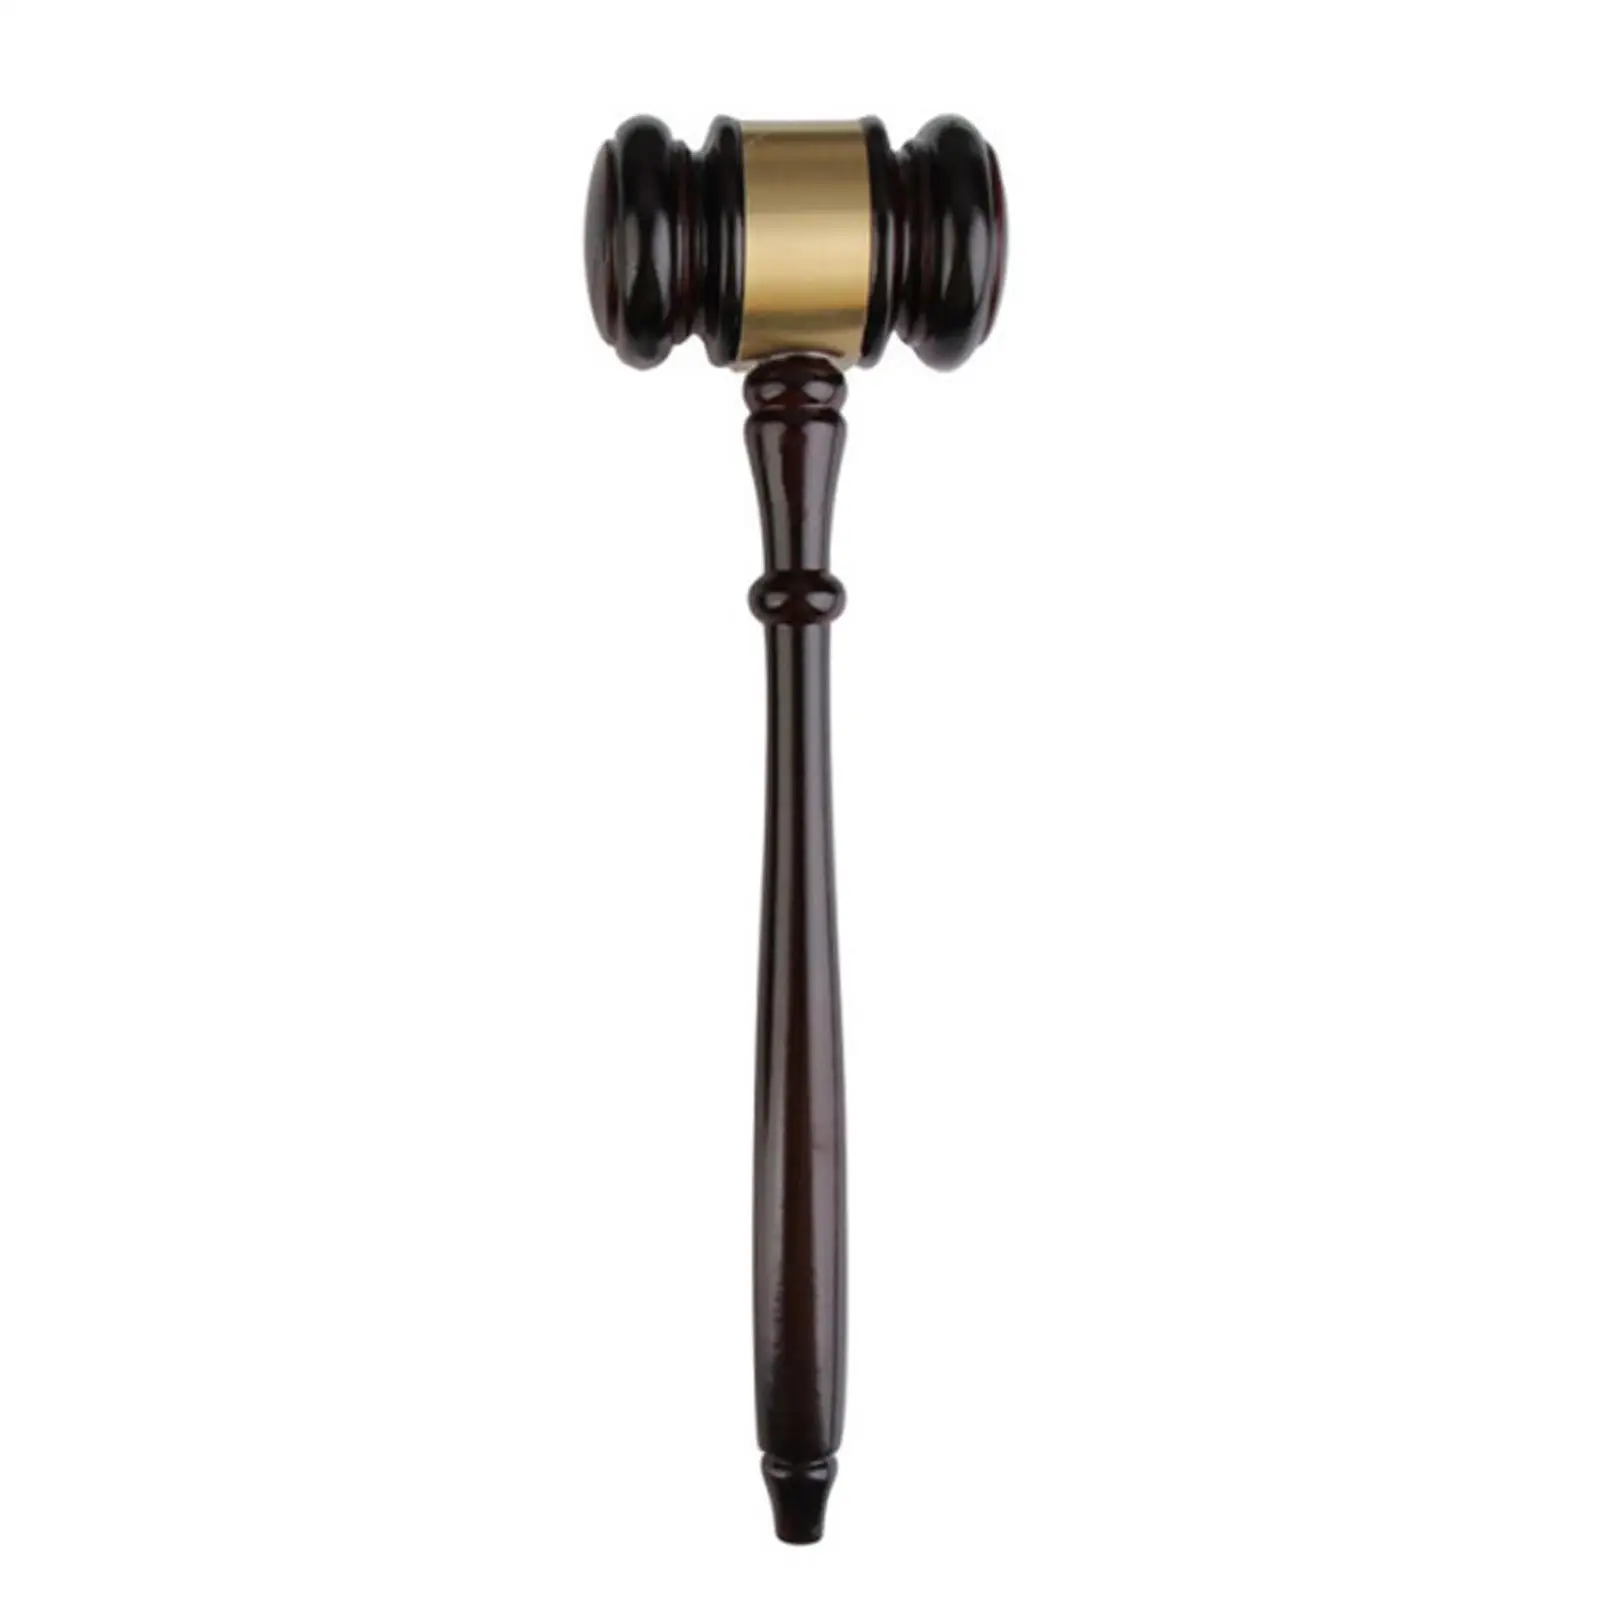 Handmade Mini Mallet Costume Accessory Unique Craft Gifts Toys Party Favors Cosplay Props Gavel Toy for Role Play Justice Gifts